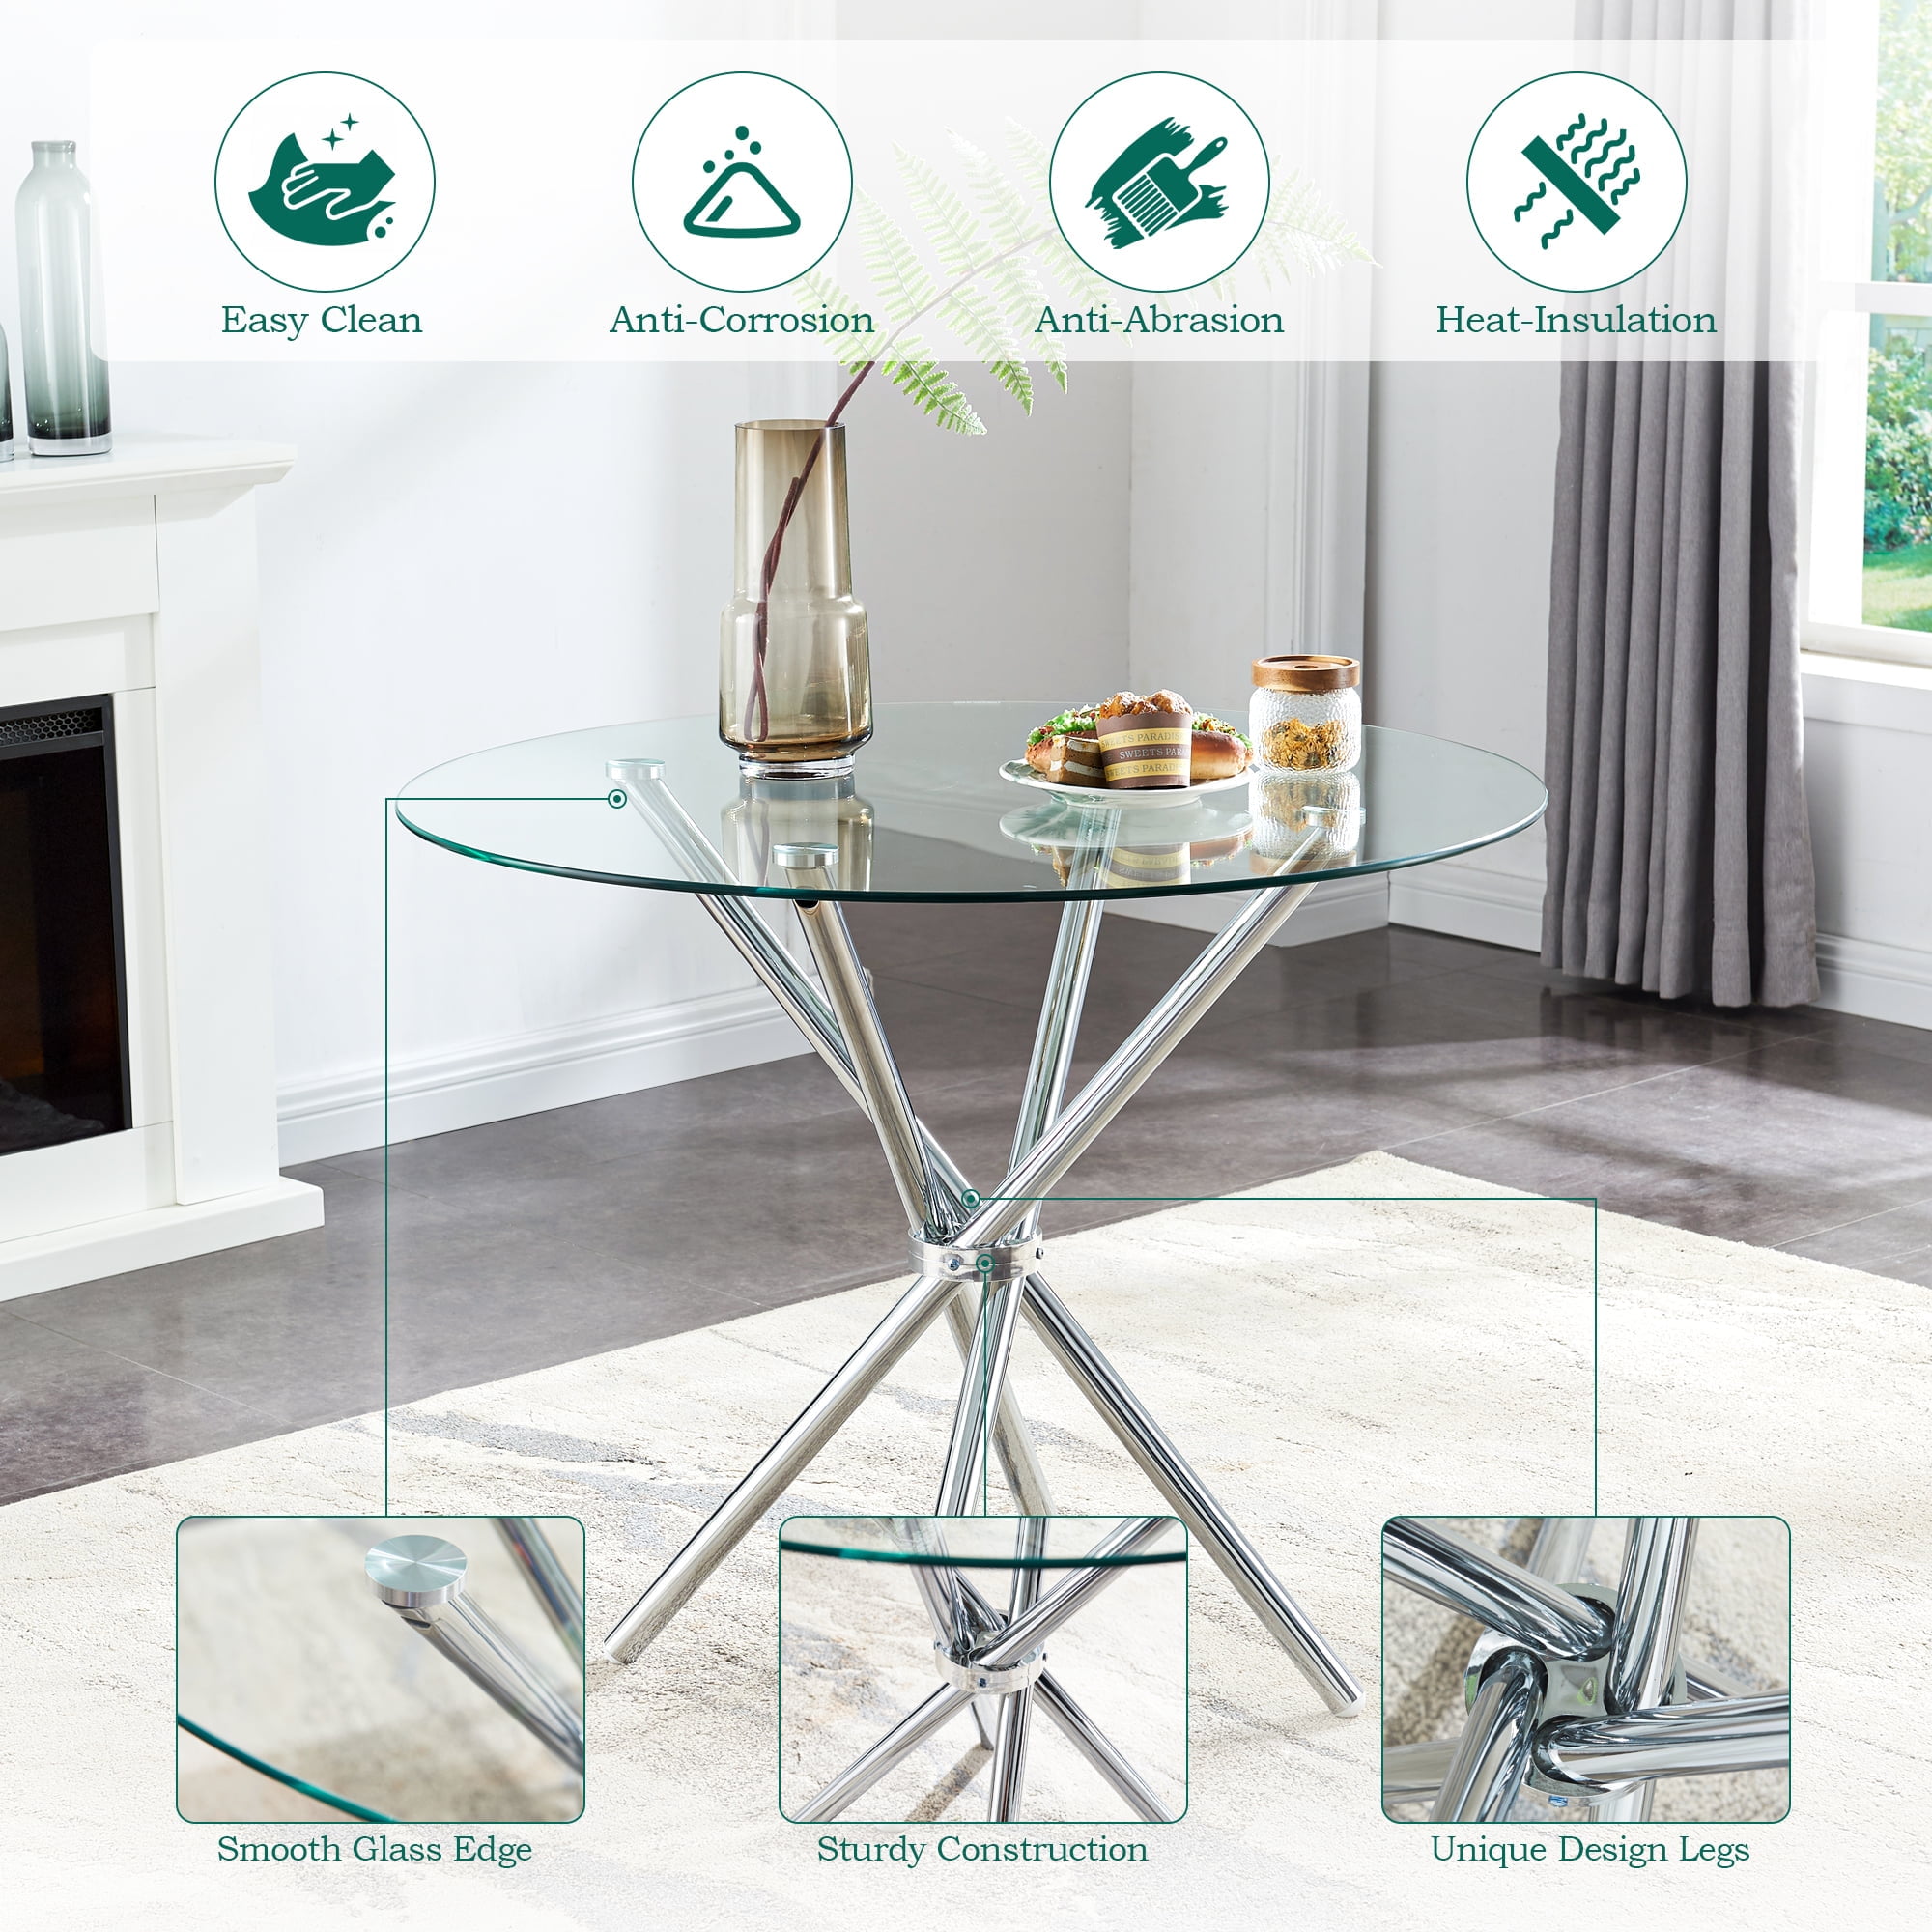 How to Clean a Glass Dining Table